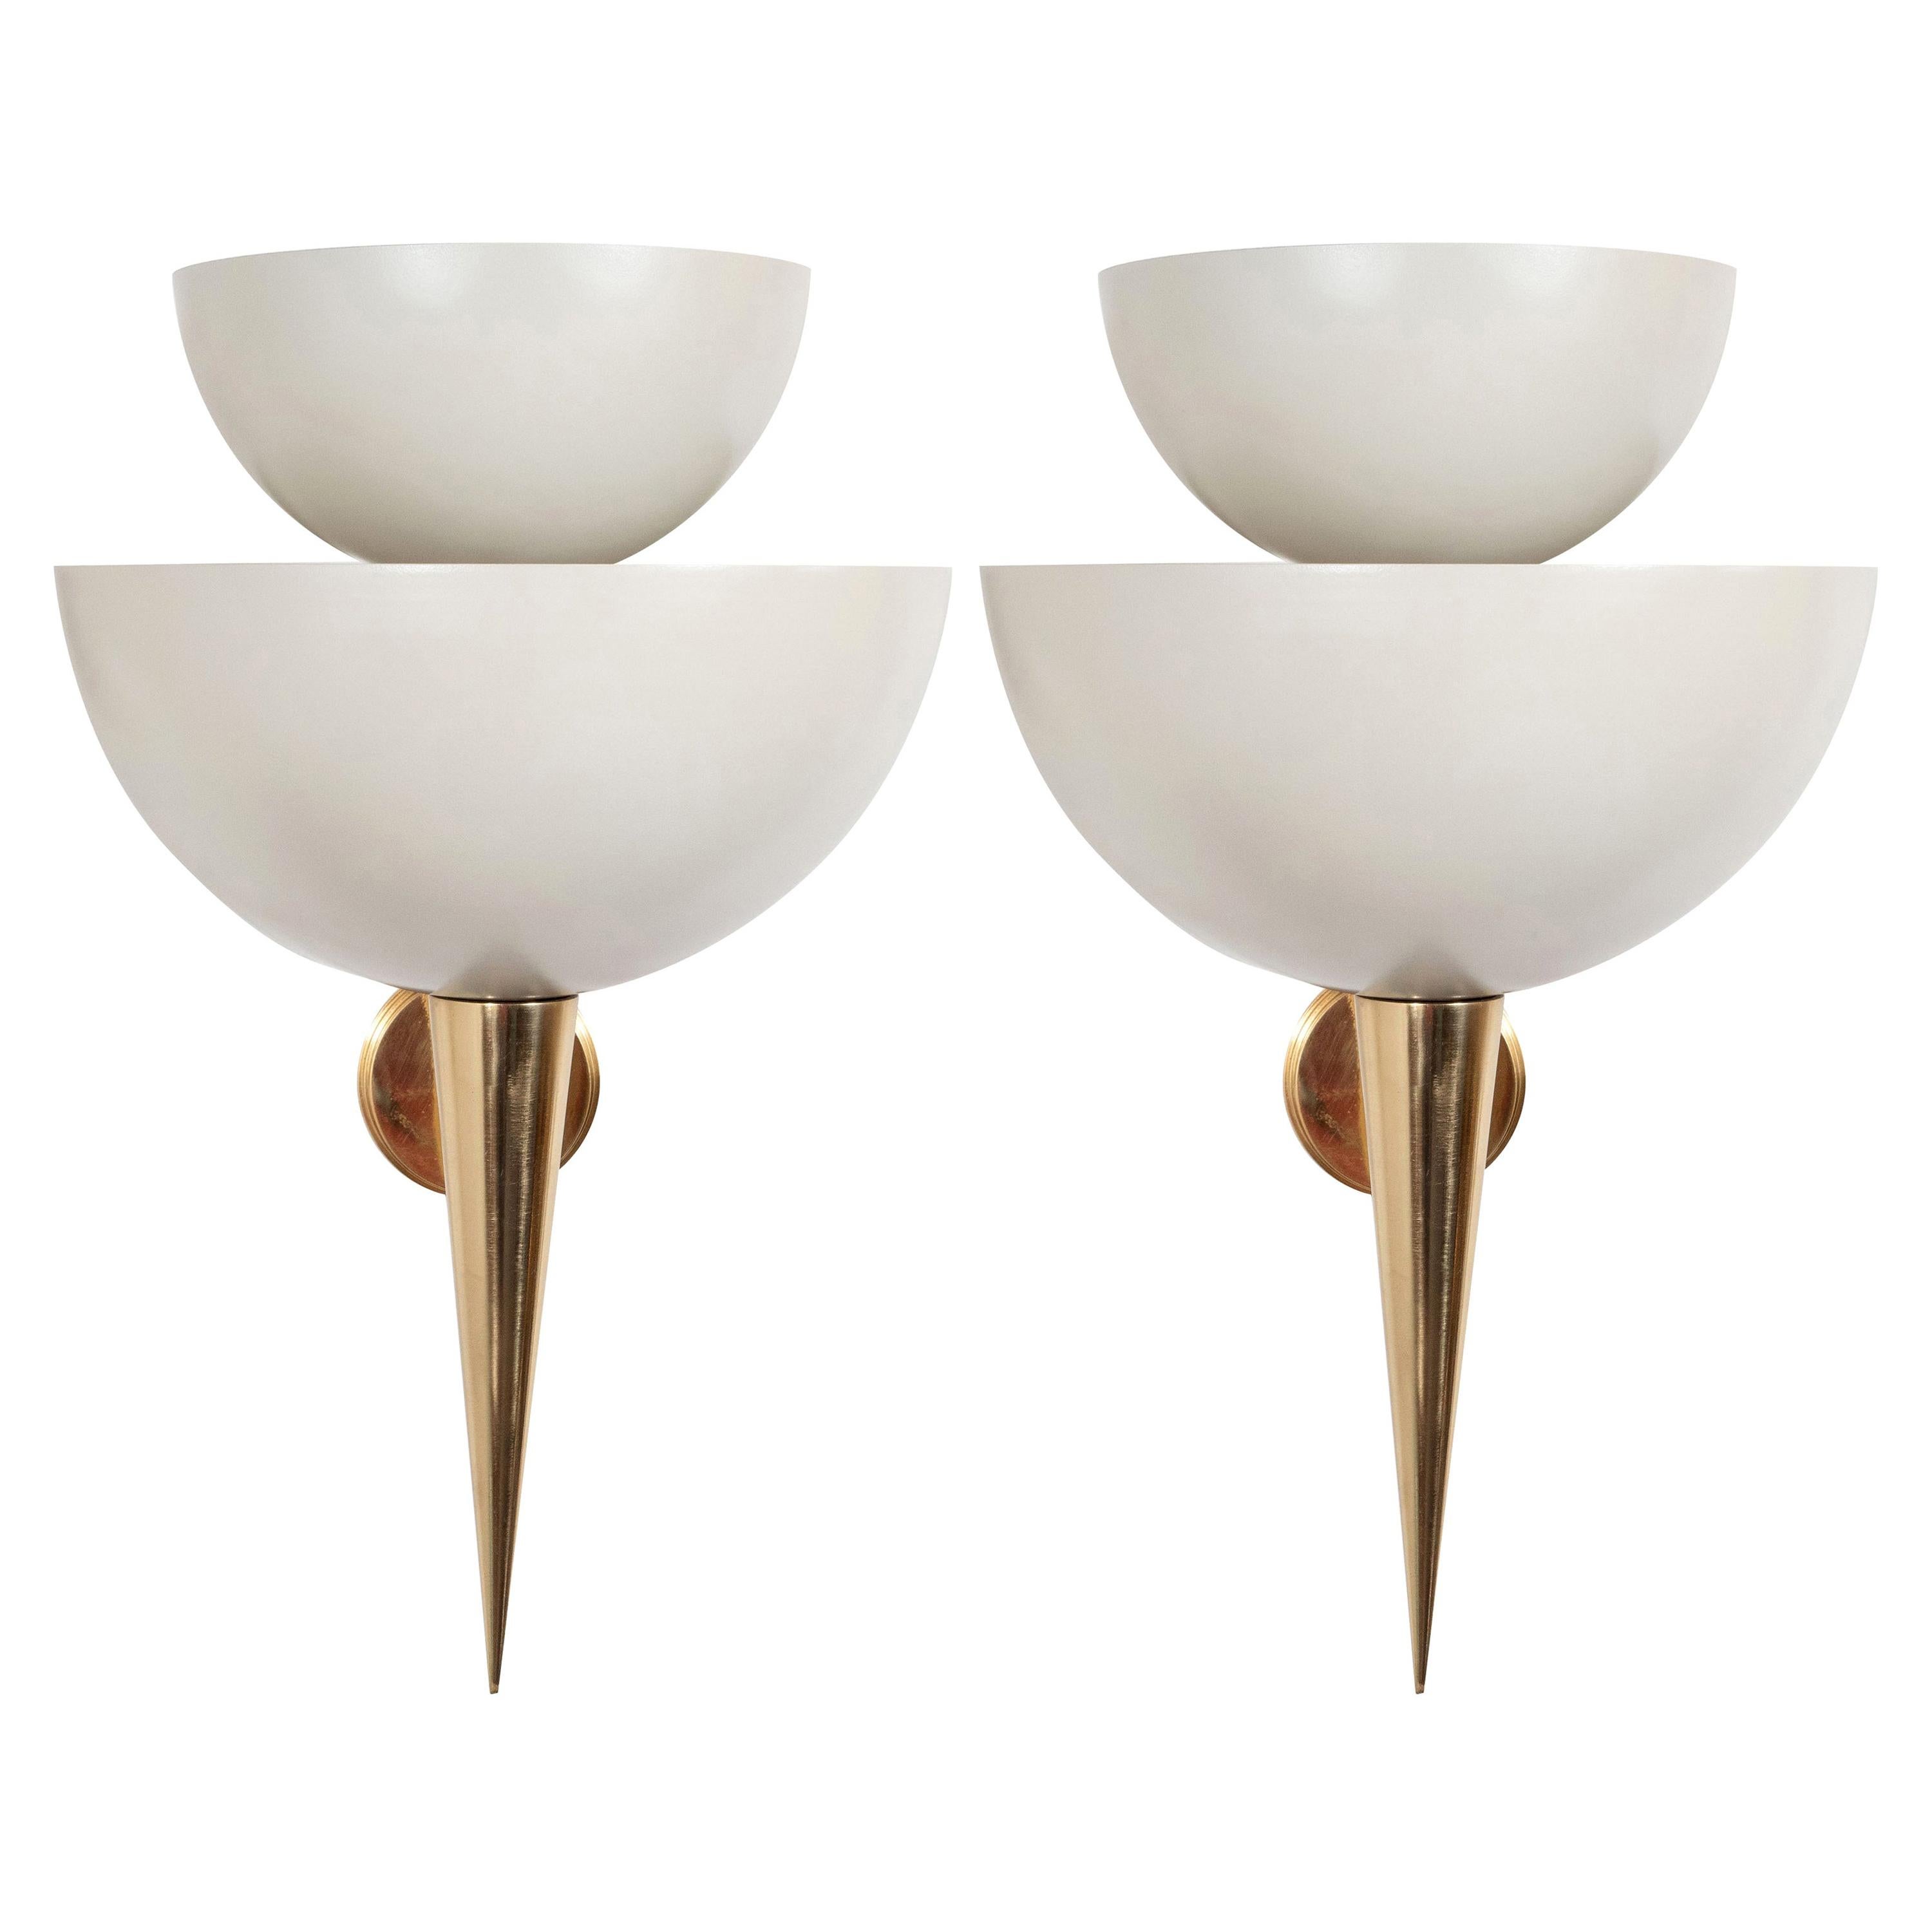 Pair of Soft White Powder-Coated Metal Cup and Brass Spear Sconces, Italy